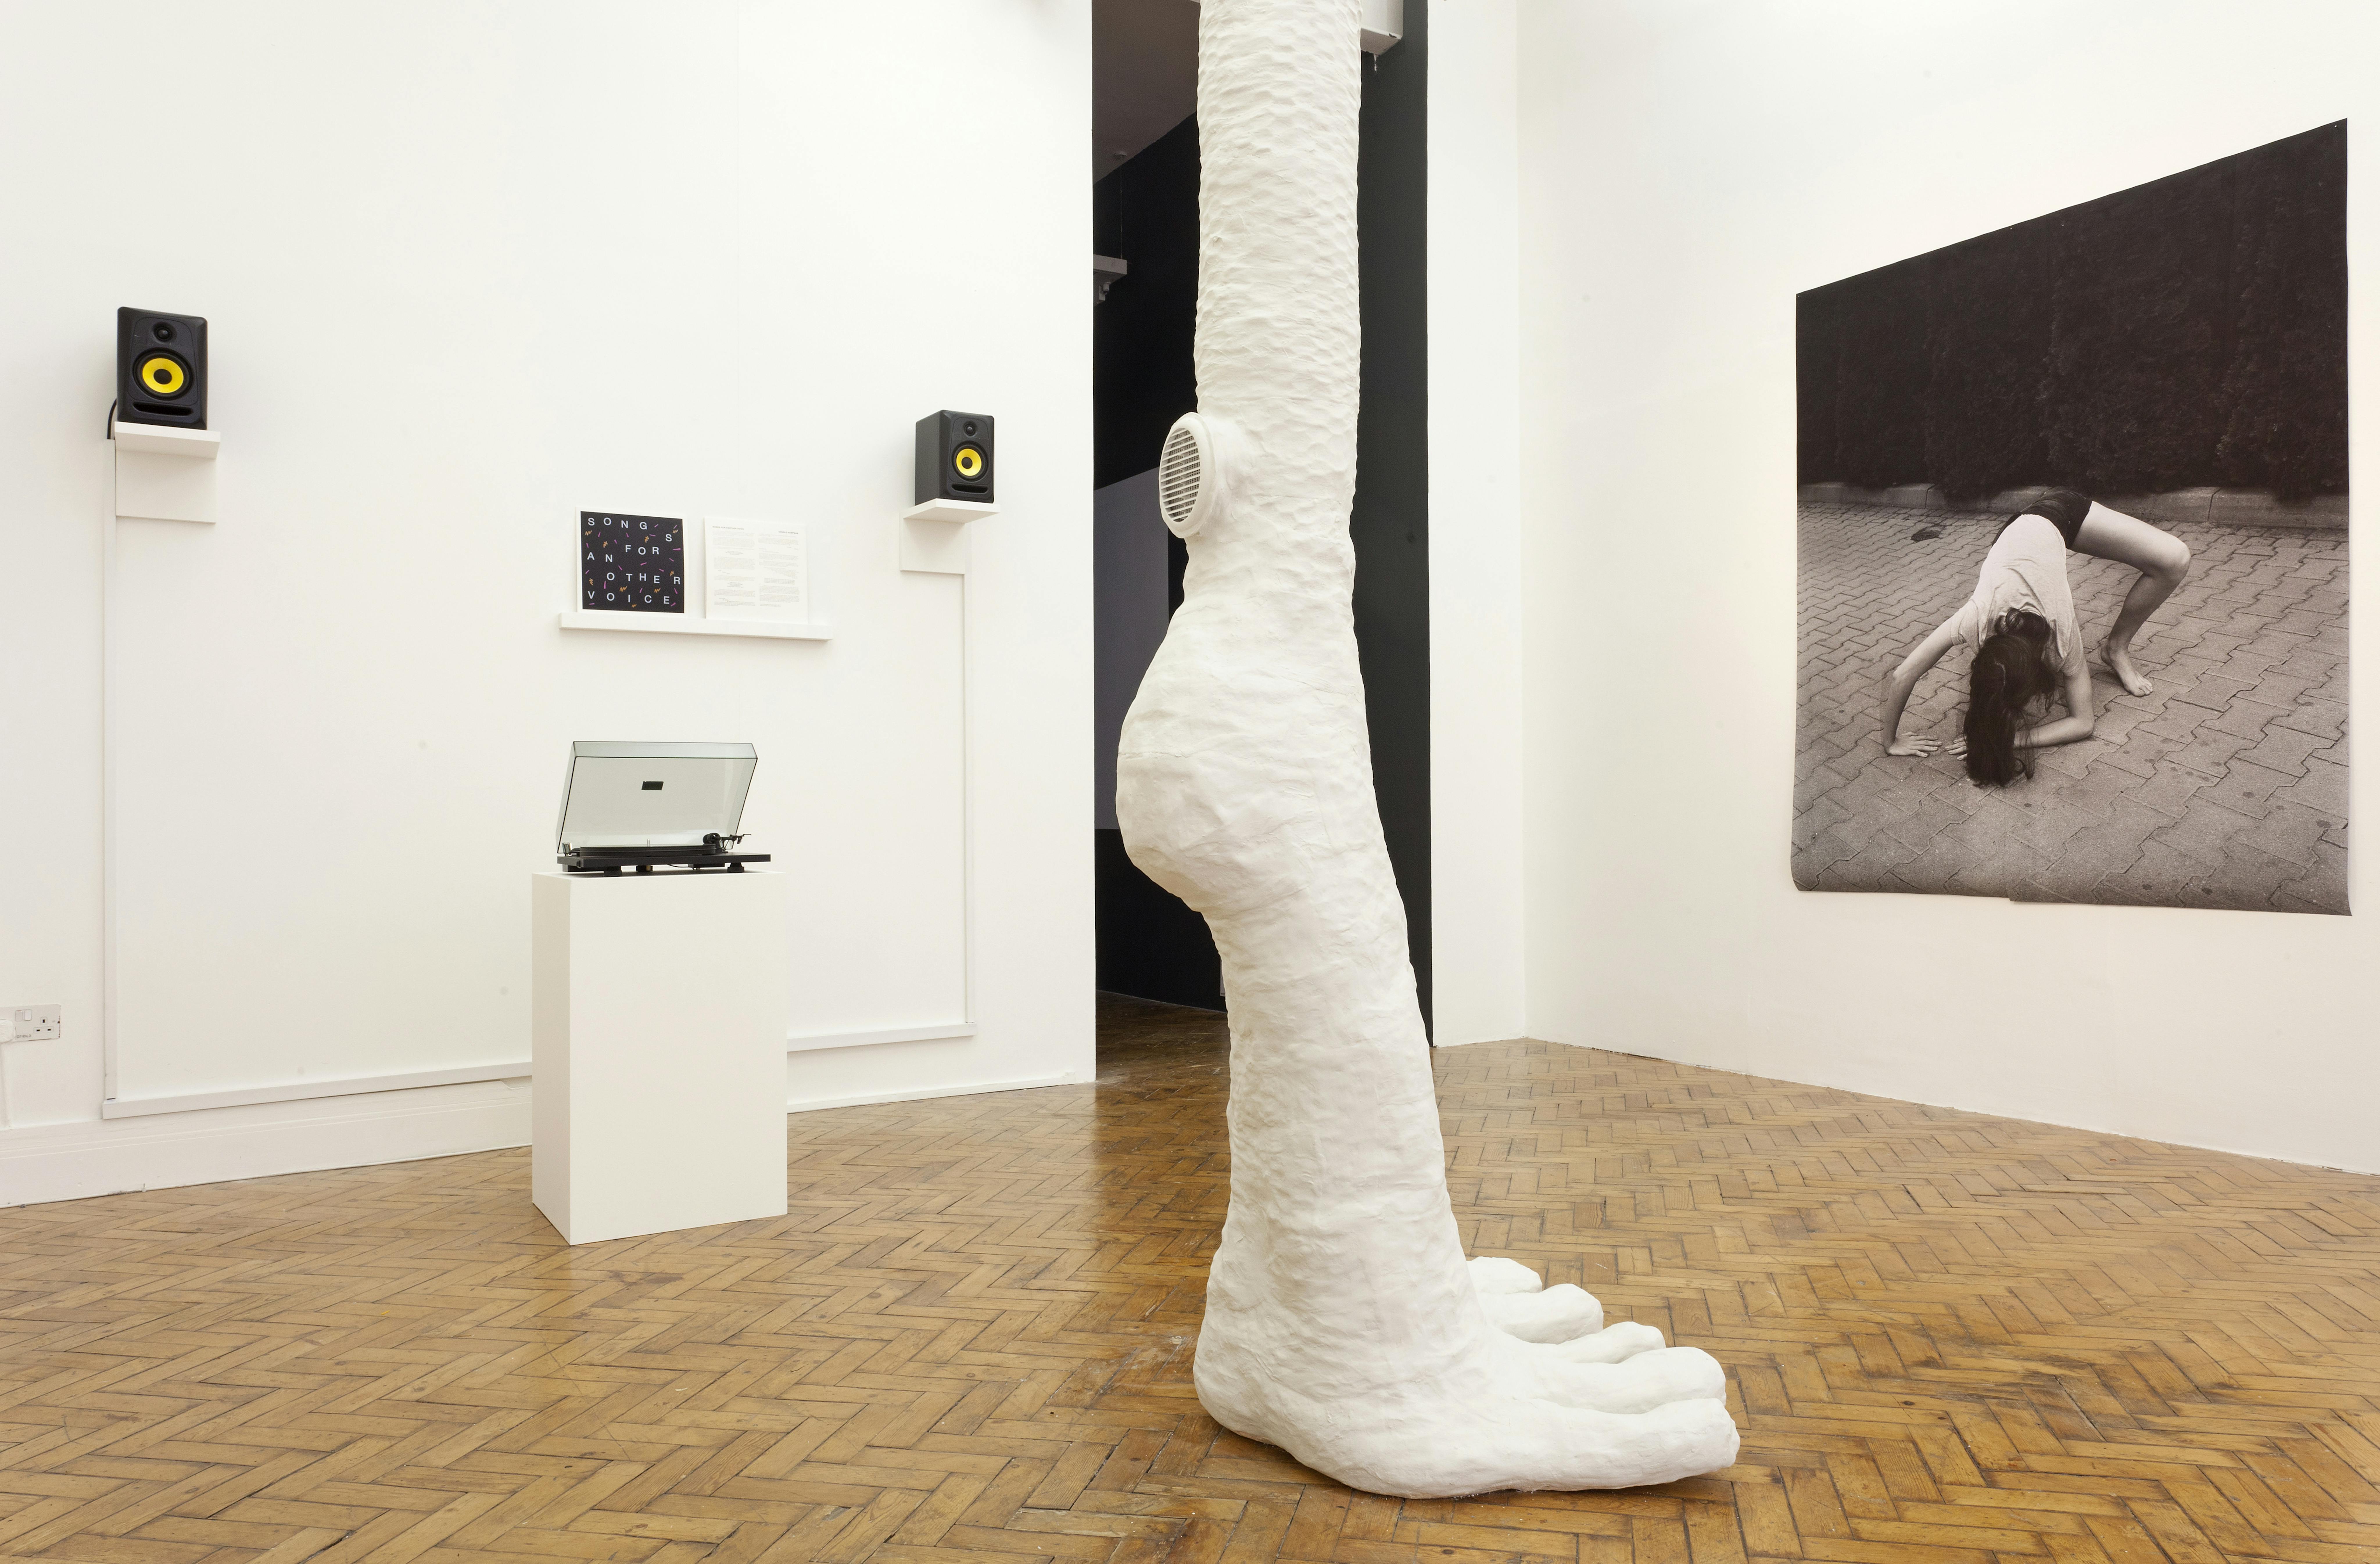 A record player is open. In the middle of the image a large foot made from plaster appears from the roof and stands on the gallery floor. On the right of the image is a large black and white photograph of a person enacting a strange uncomfortable pose. 